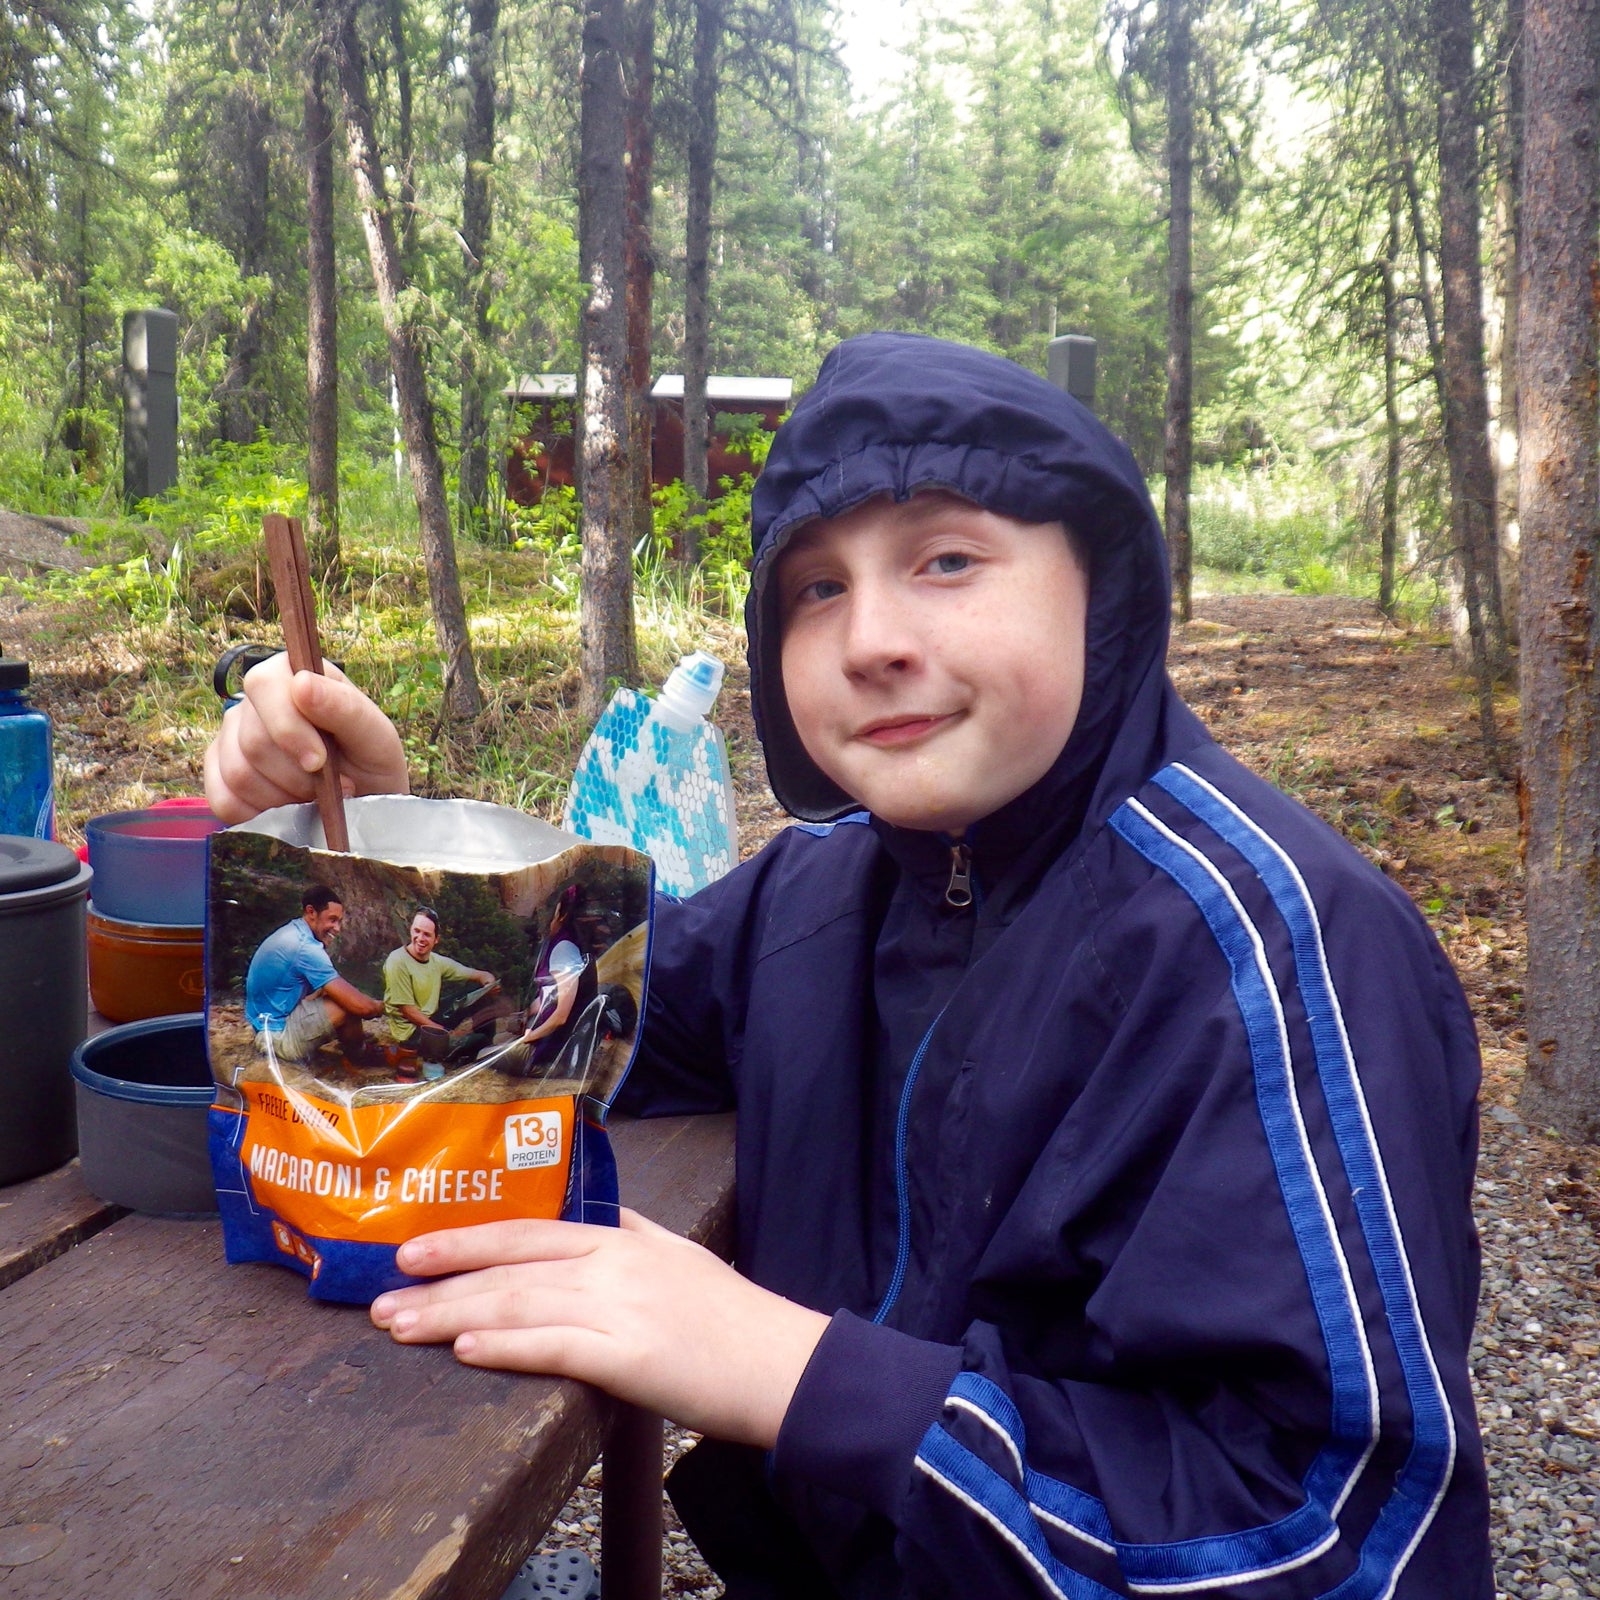 Close up of kid eating a backpacking meal at a camp picnic table.